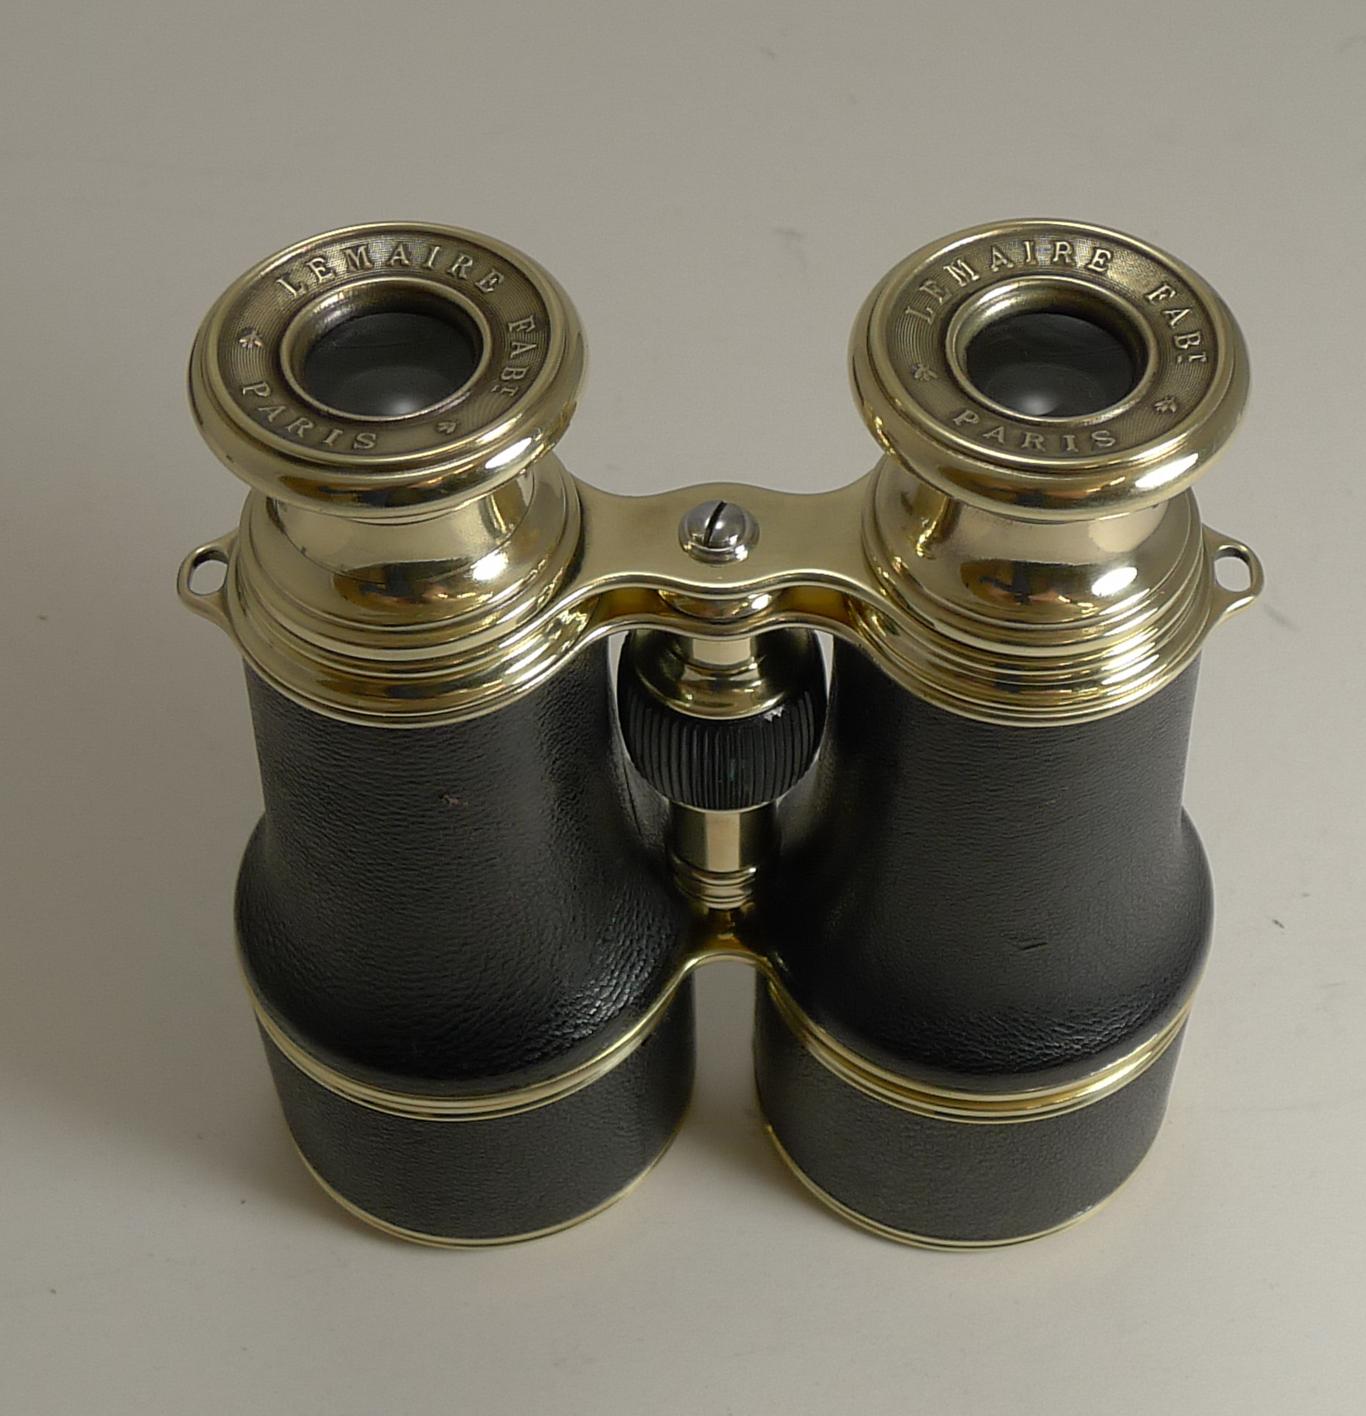 Pair of WWI Binoculars and Case, British Officer's Issue, 1916, LeMaire, Paris 3